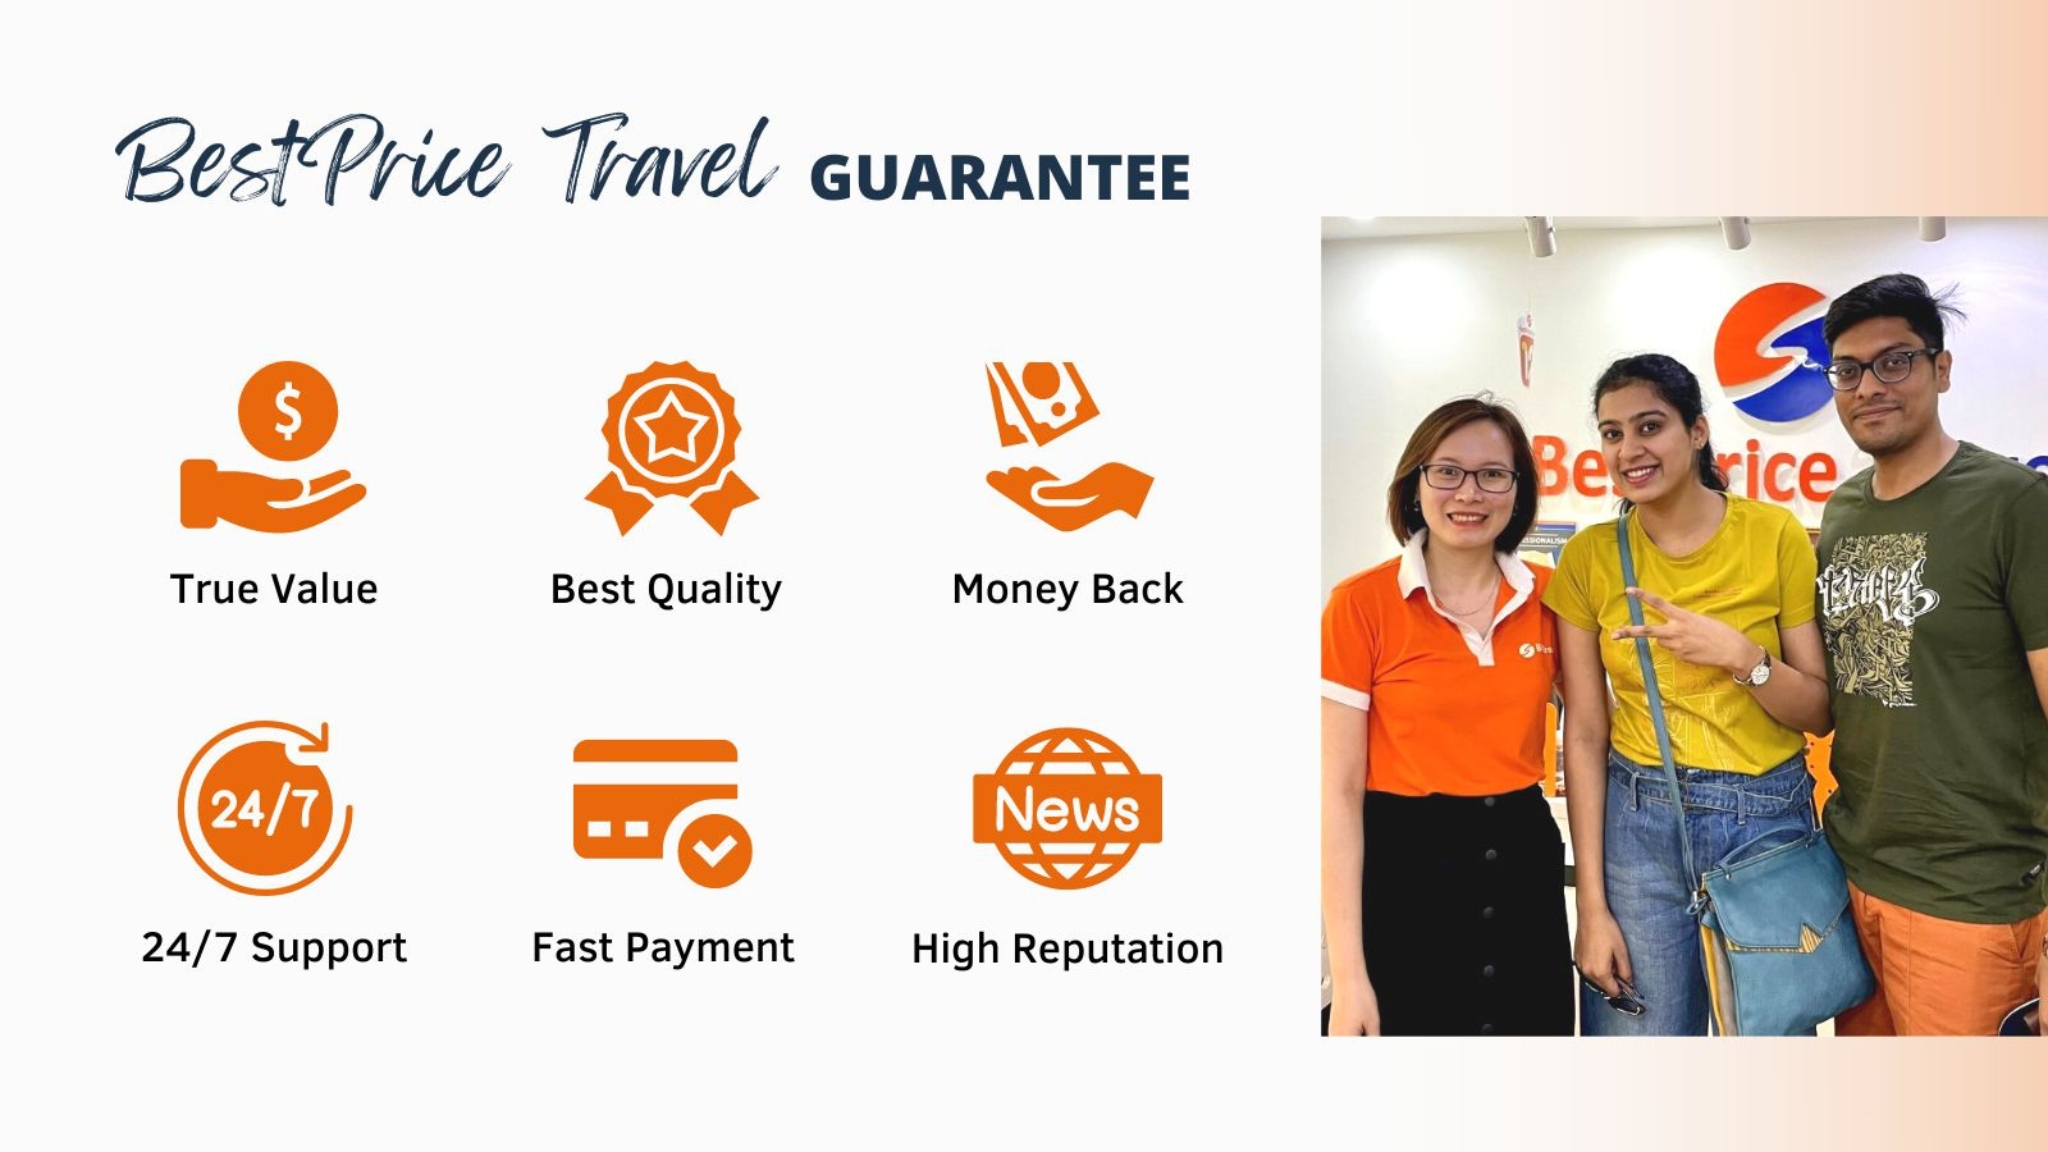 Overview of BestPrice Travel’s guarantee for customers